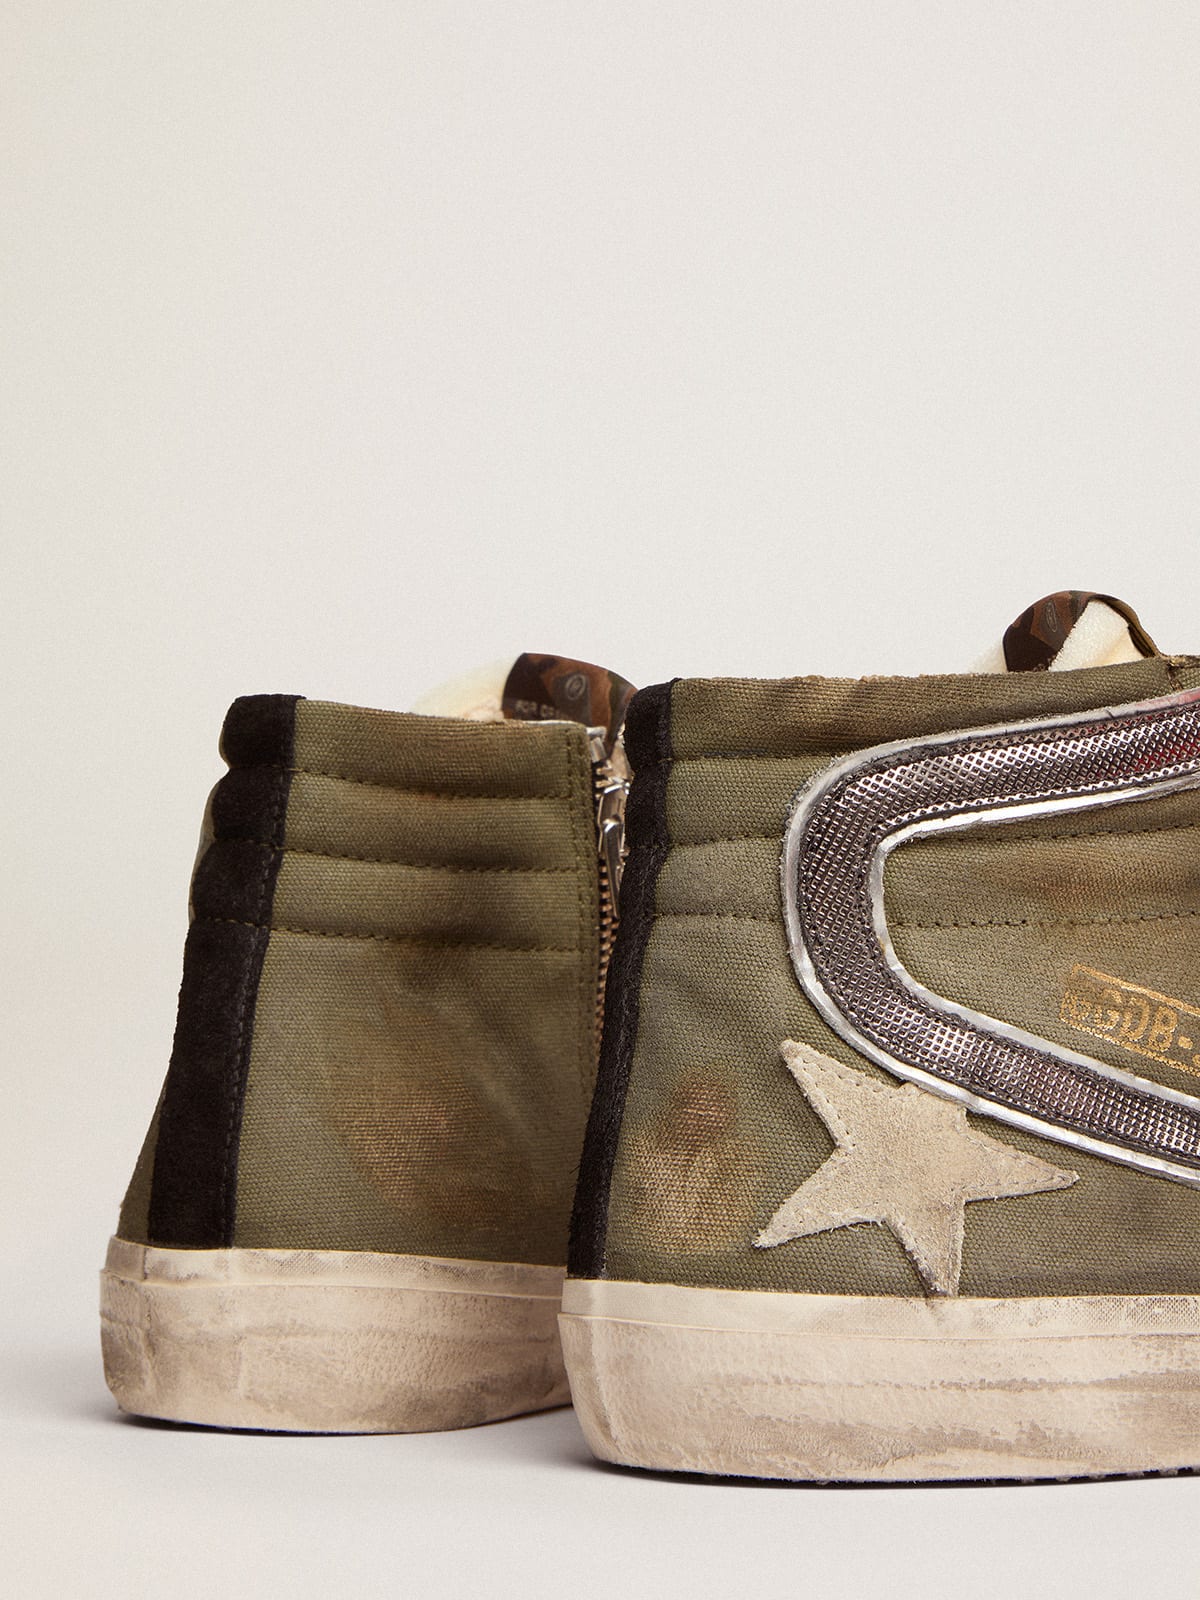 Golden Goose - Slide Penstar in army green canvas with an ice-colored star in 